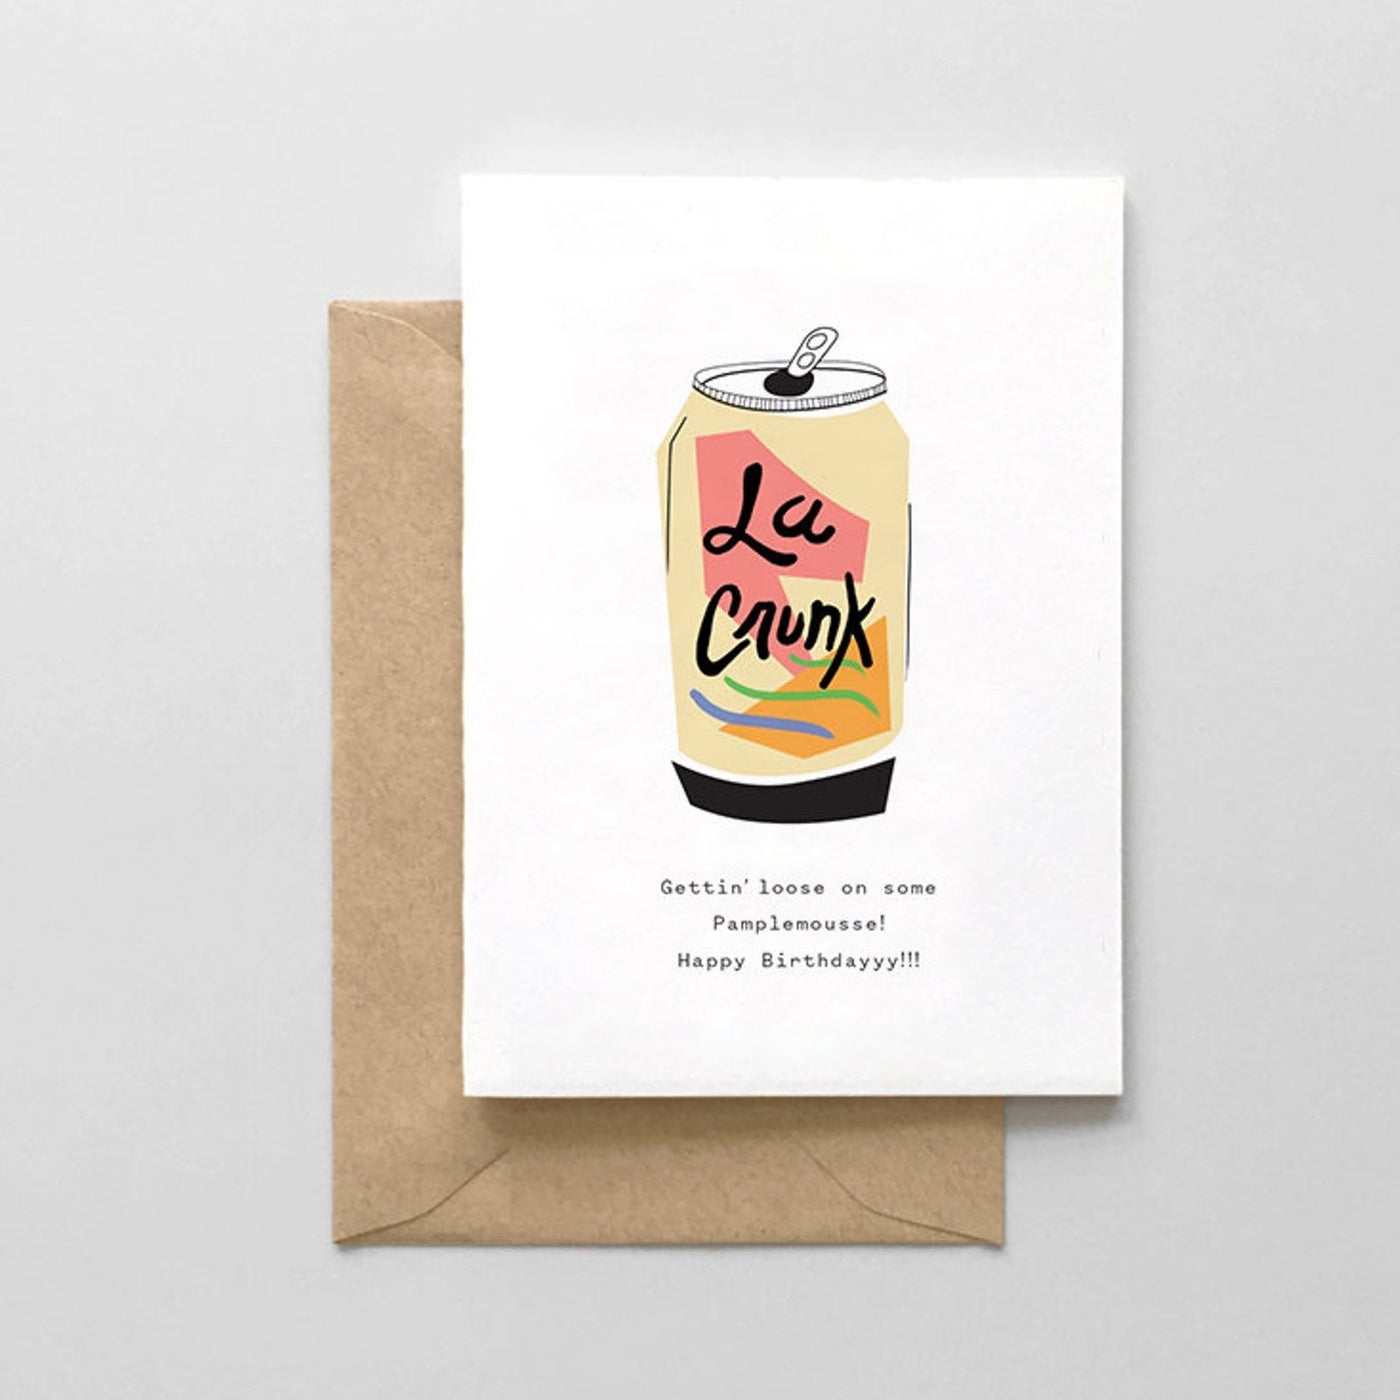 A Birthday card printed on thick white card stock with an image of a can of La Croix grapefruit sparkling water and the words 'Gettin' loose on some pamplemousse! Happy Birthday!! below.